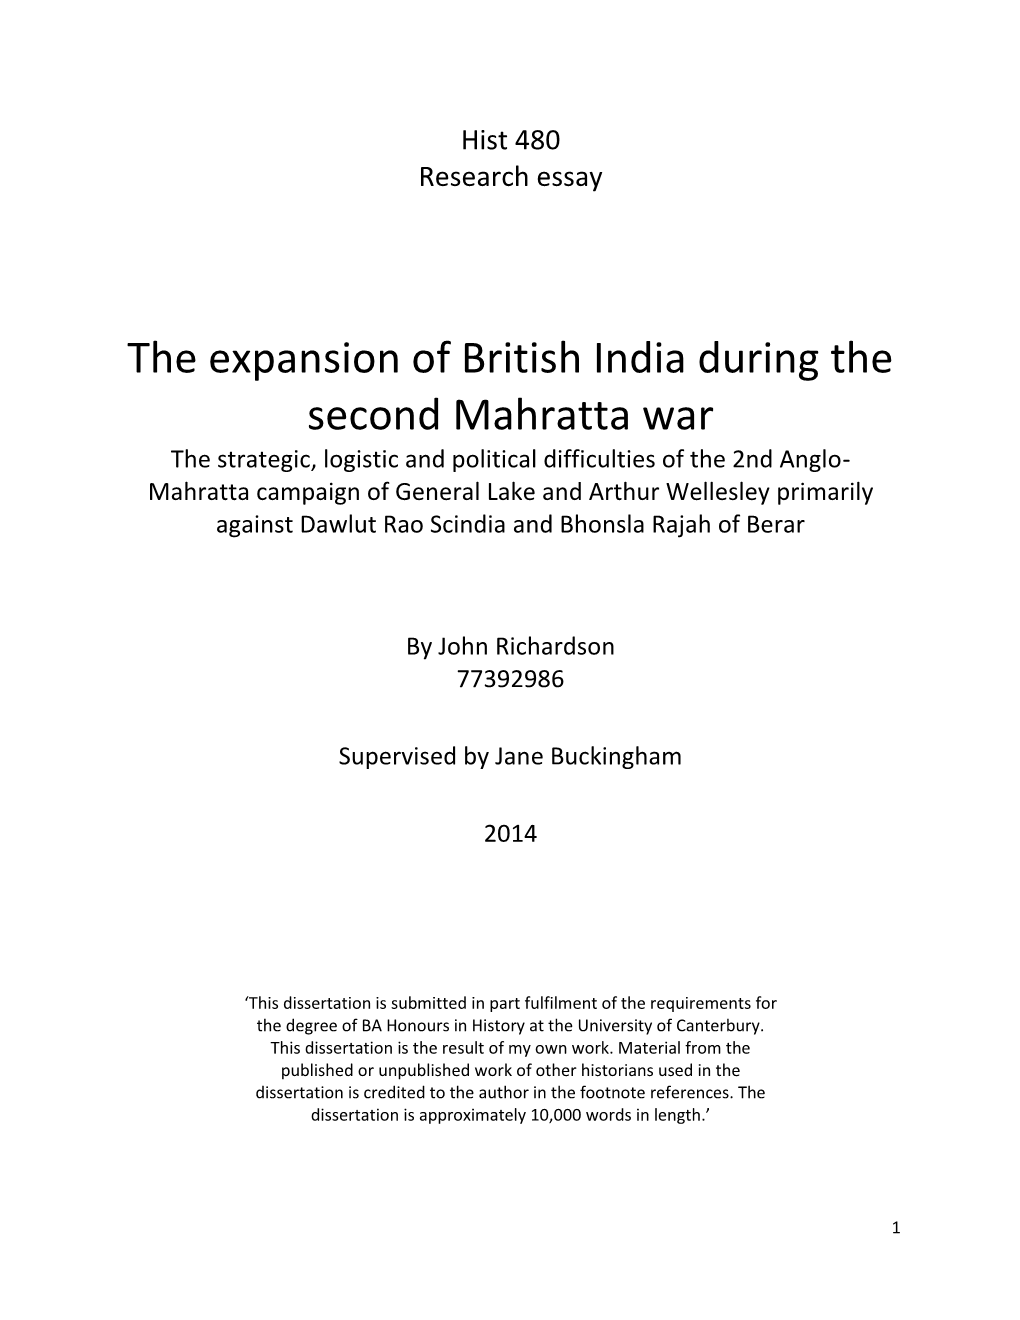 The Expansion of British India During the Second Mahratta